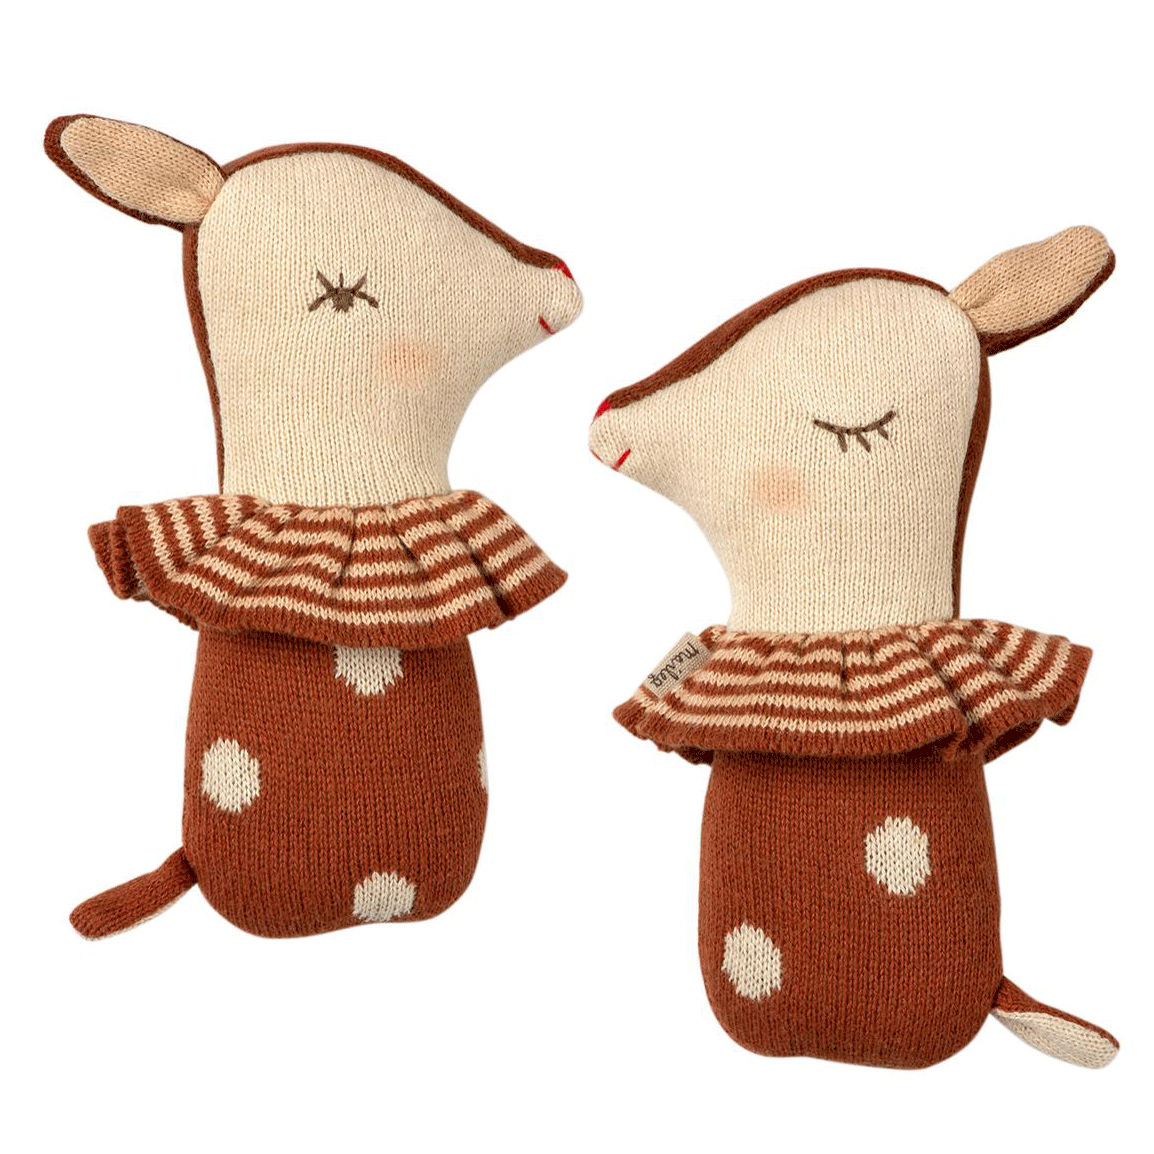 Maileg Baby Bambi Rattle at Bonjour Baby Baskets - Luxury Baby Gifts